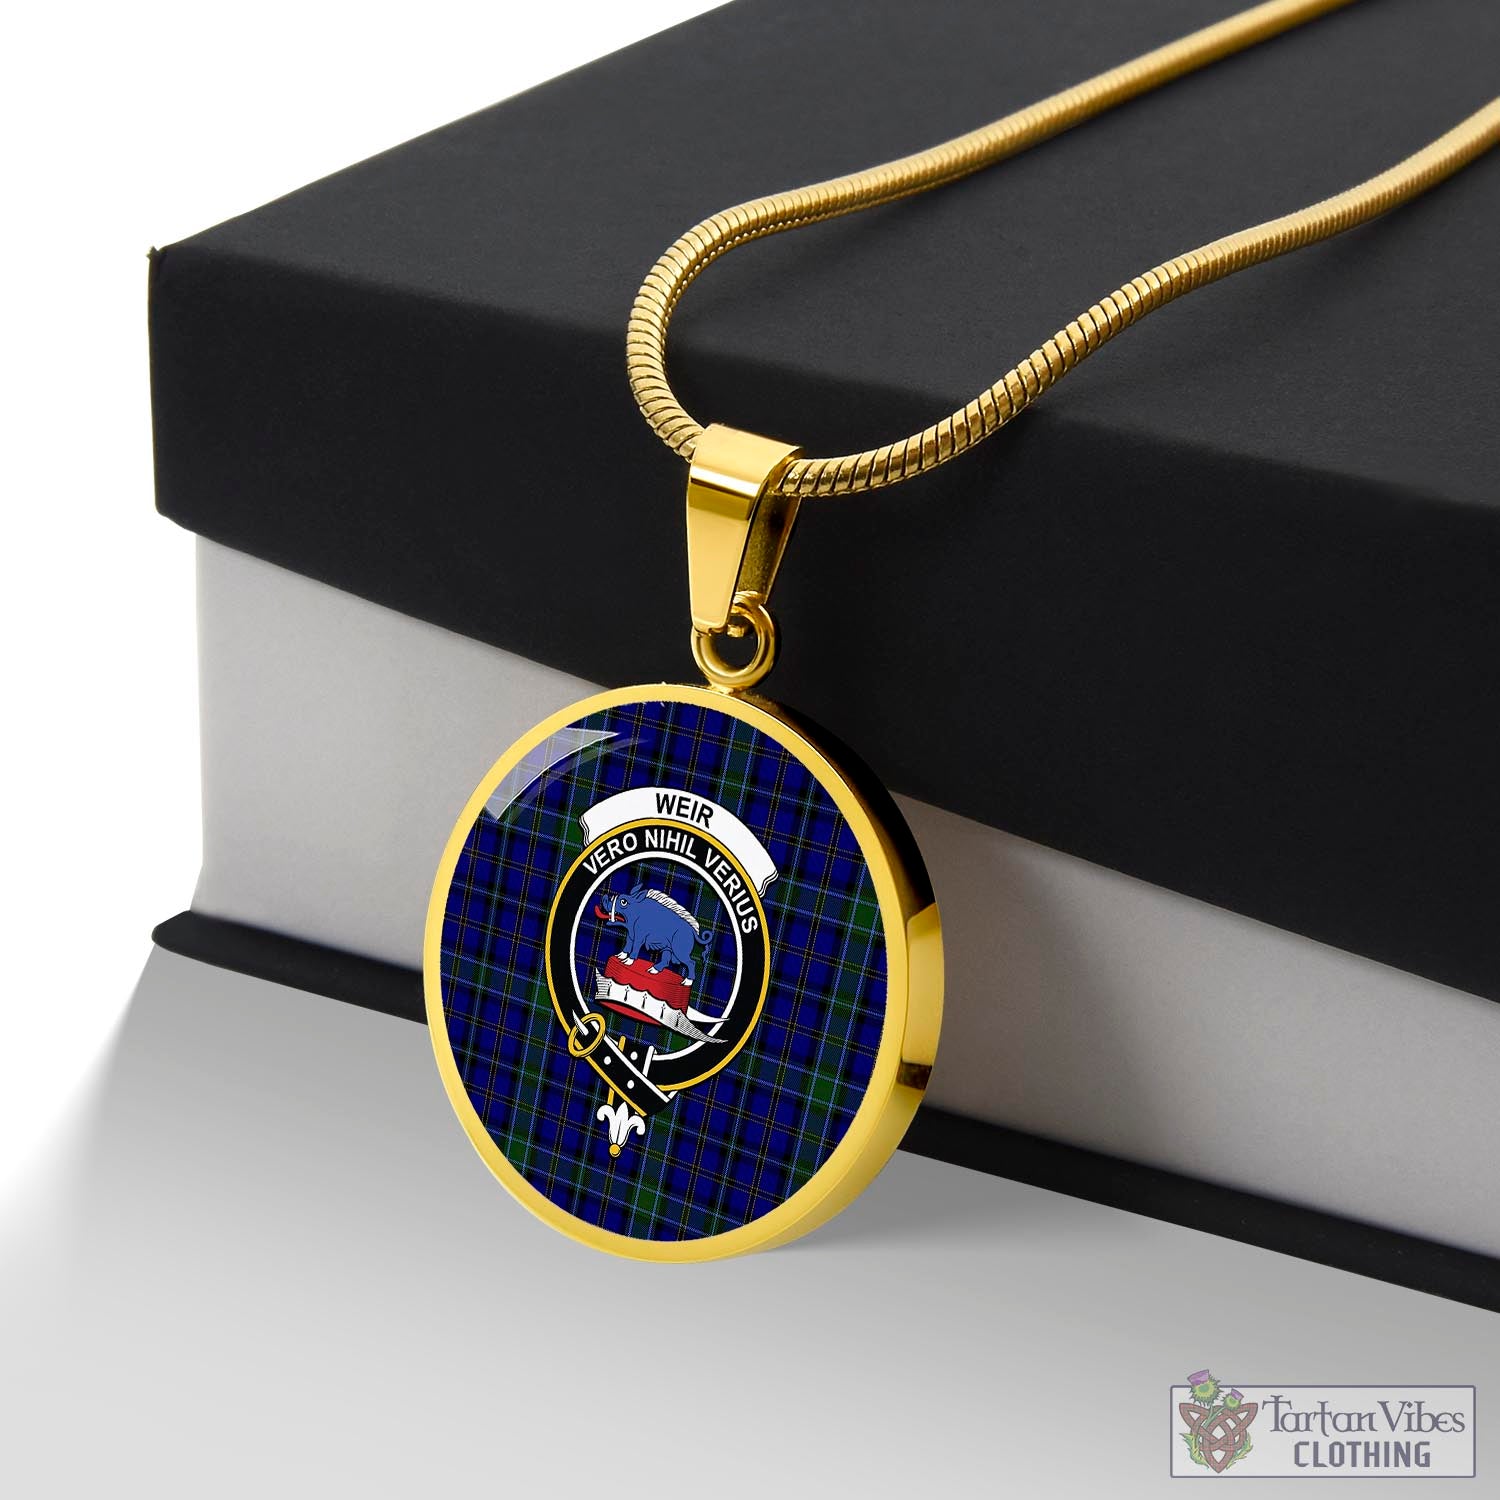 Tartan Vibes Clothing Weir Tartan Circle Necklace with Family Crest